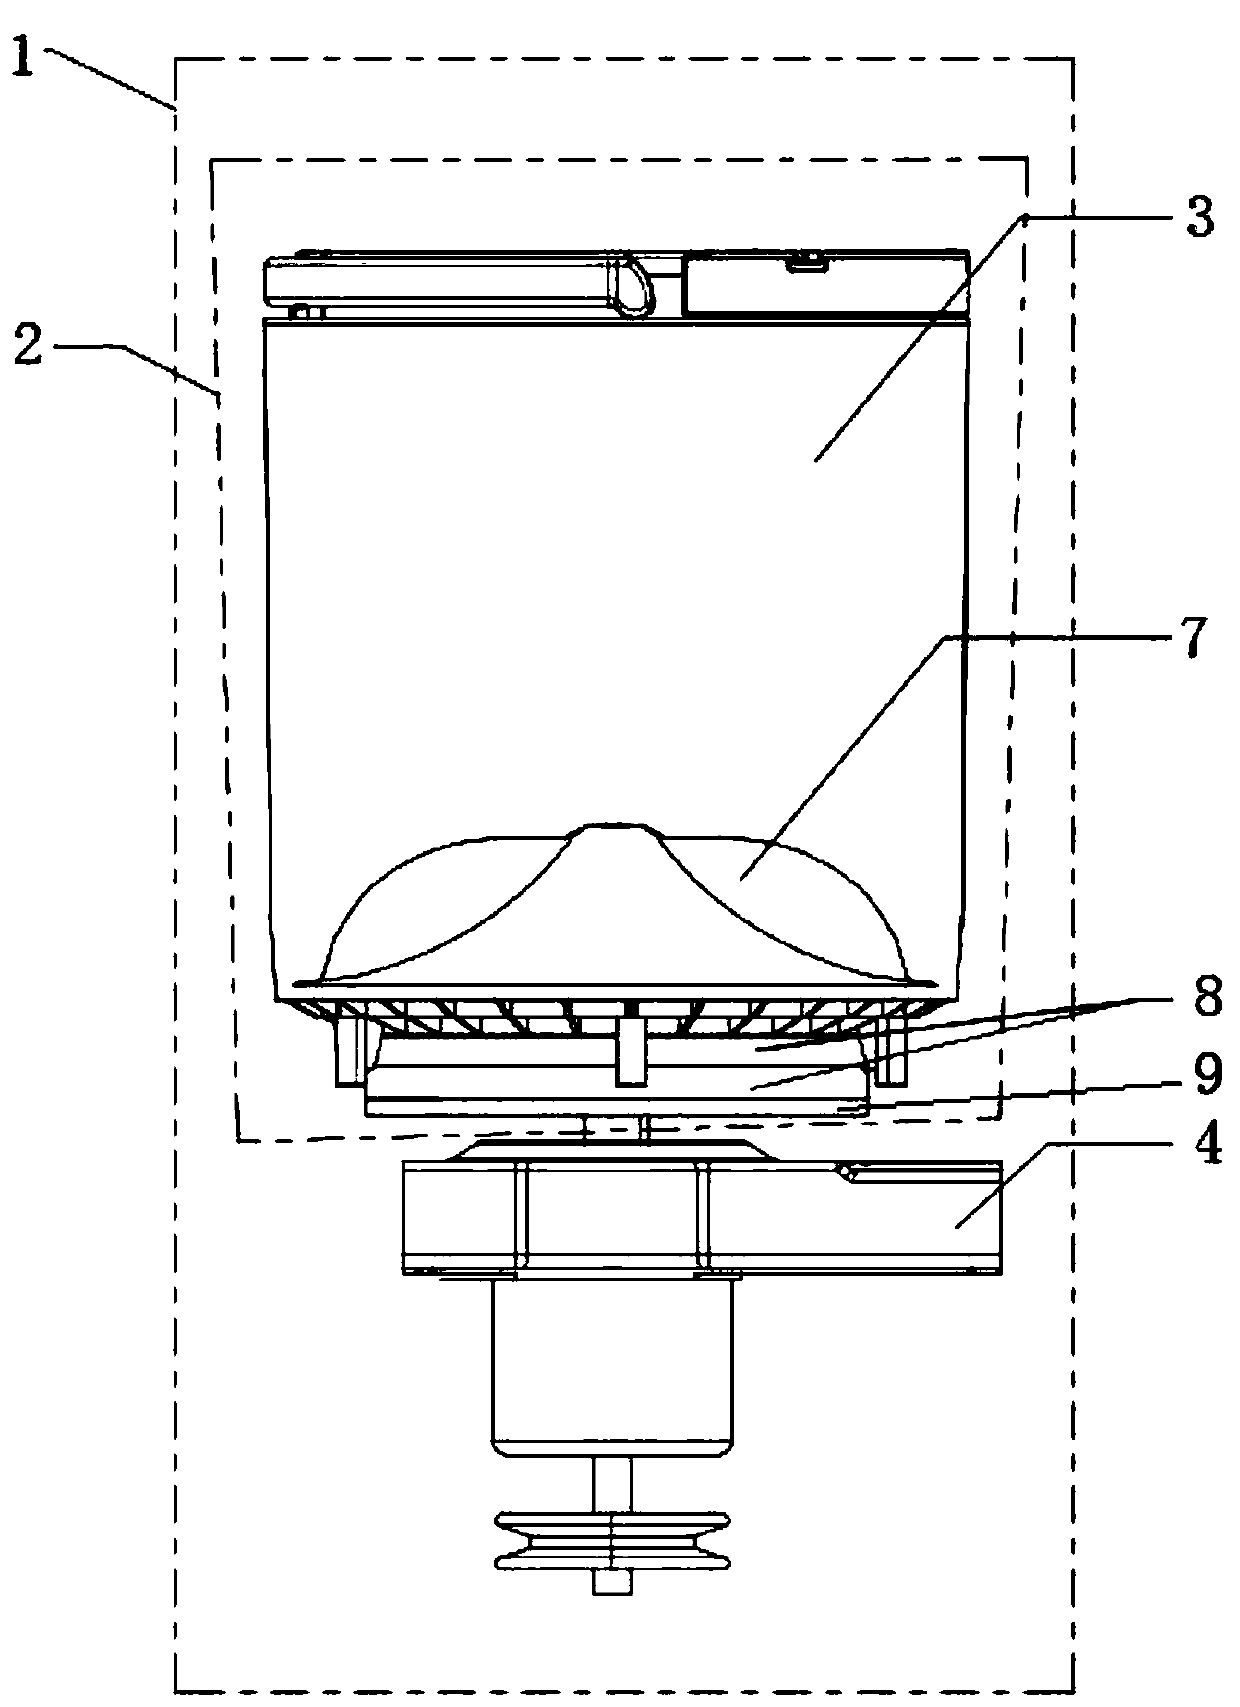 Full-automatic washing machine provided with rapidly detachable inner drums